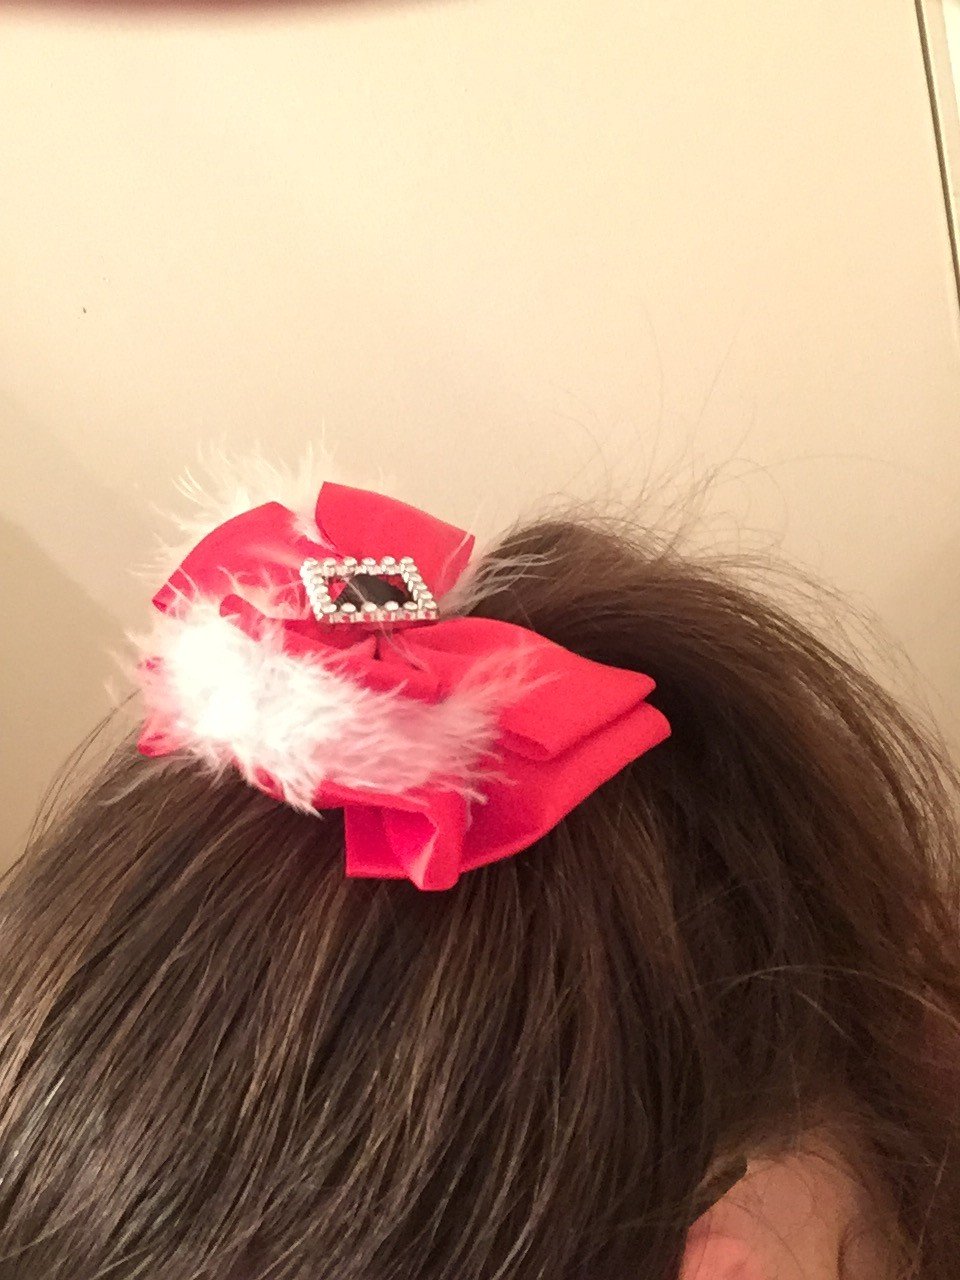 Photo by littlegirl1222 with the username @littlegirl1222, who is a verified user,  December 21, 2018 at 8:02 AM. The post is about the topic Age play (cgl, ddlg, mdlg, etc) and the text says 'Wore a bow for the first time today, while at work too!! My husband said I looked very cute with it on!! 😍 I’m really proud of myself for working up the courage to actually wear it!!'